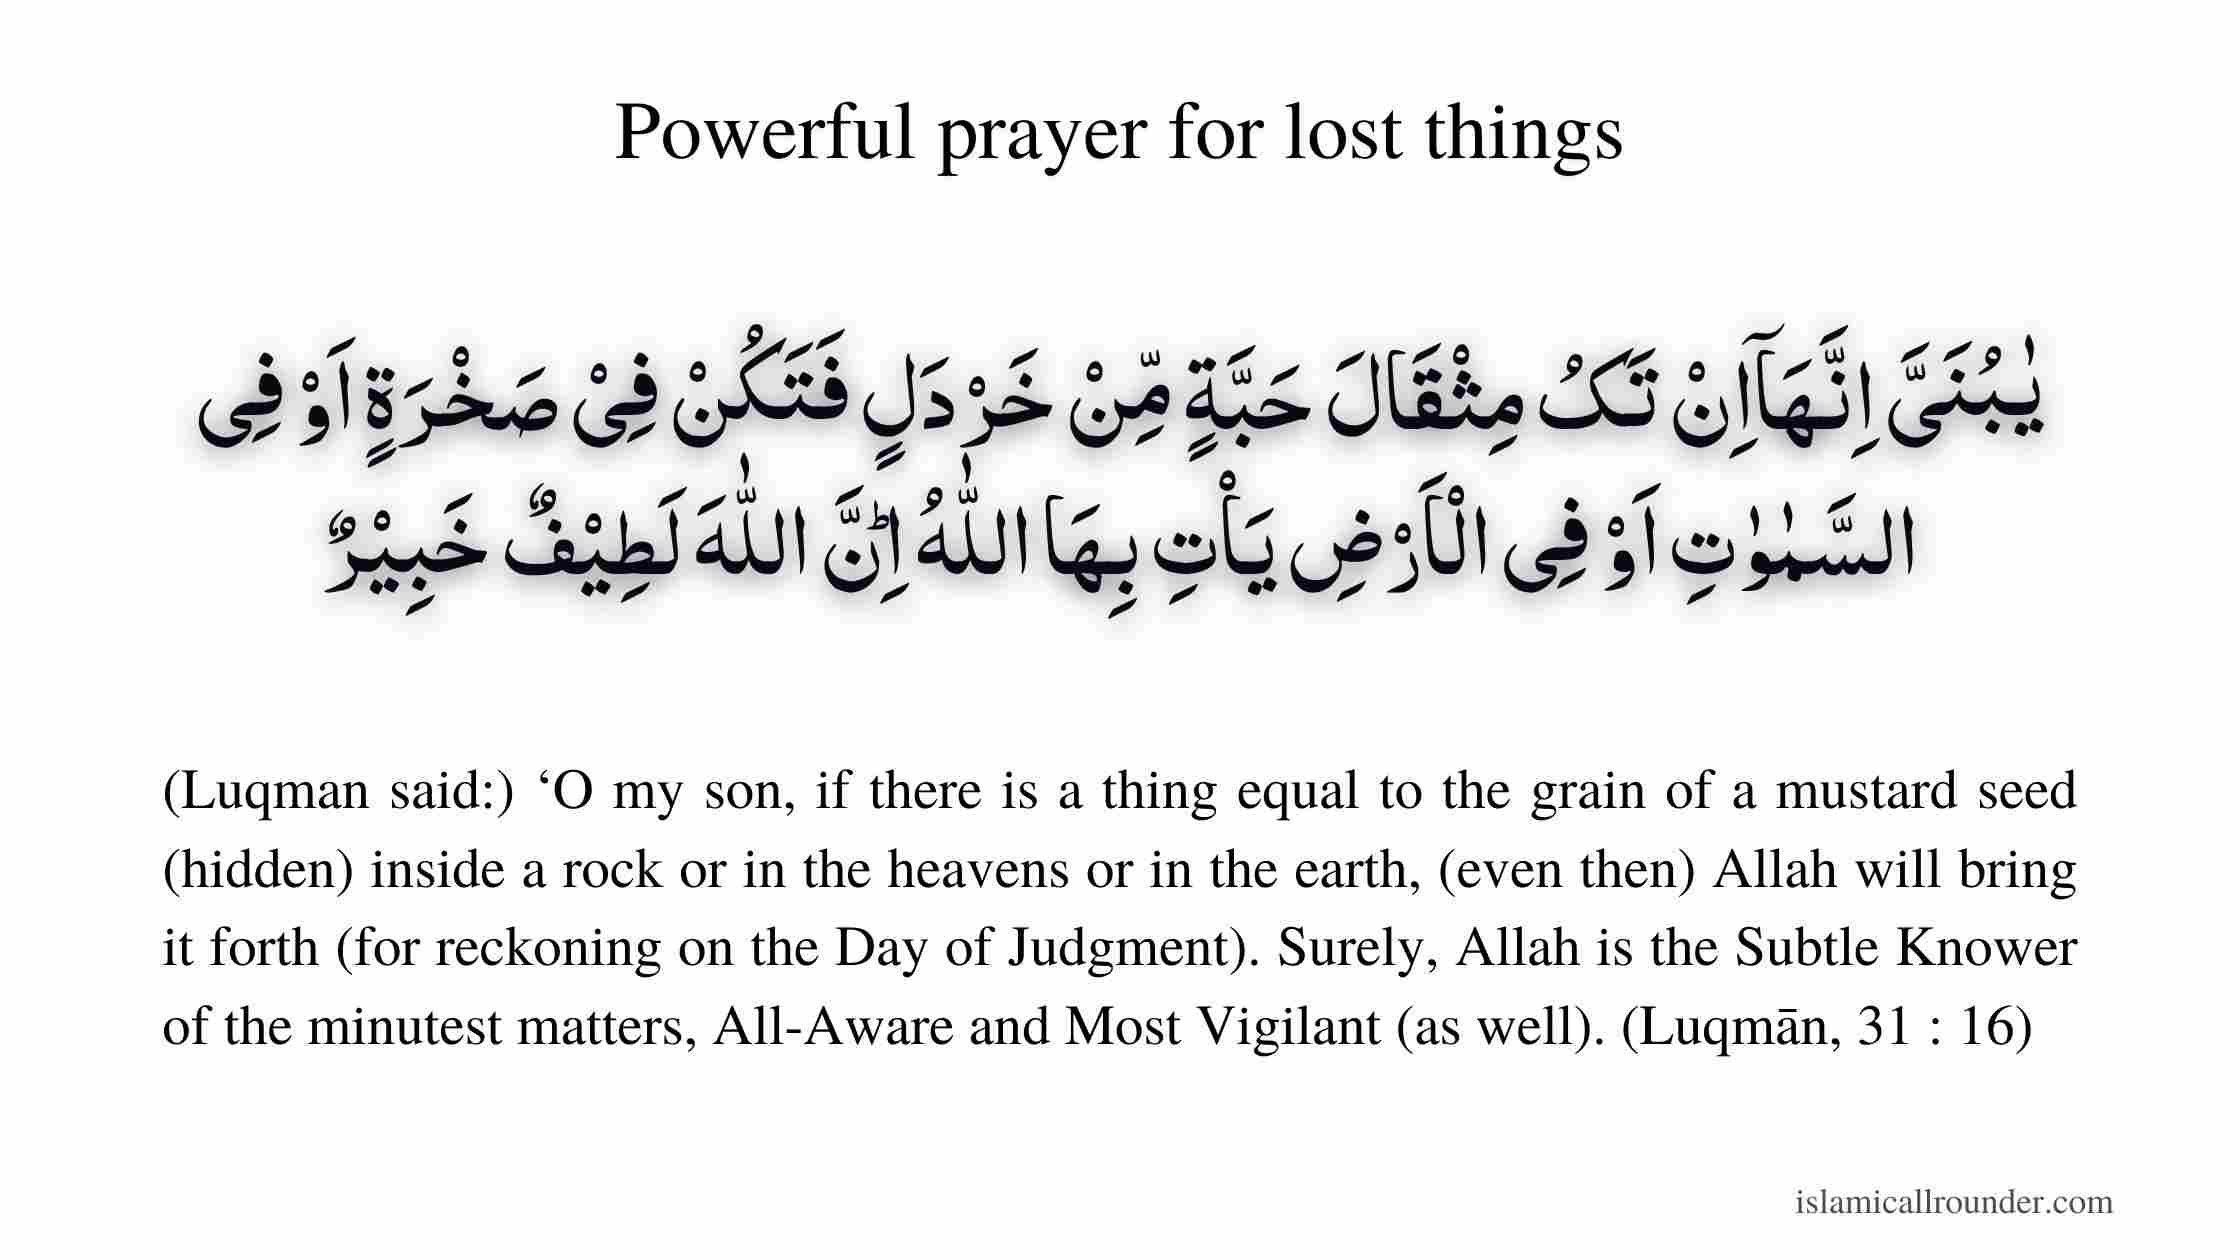 Powerful prayer for lost things